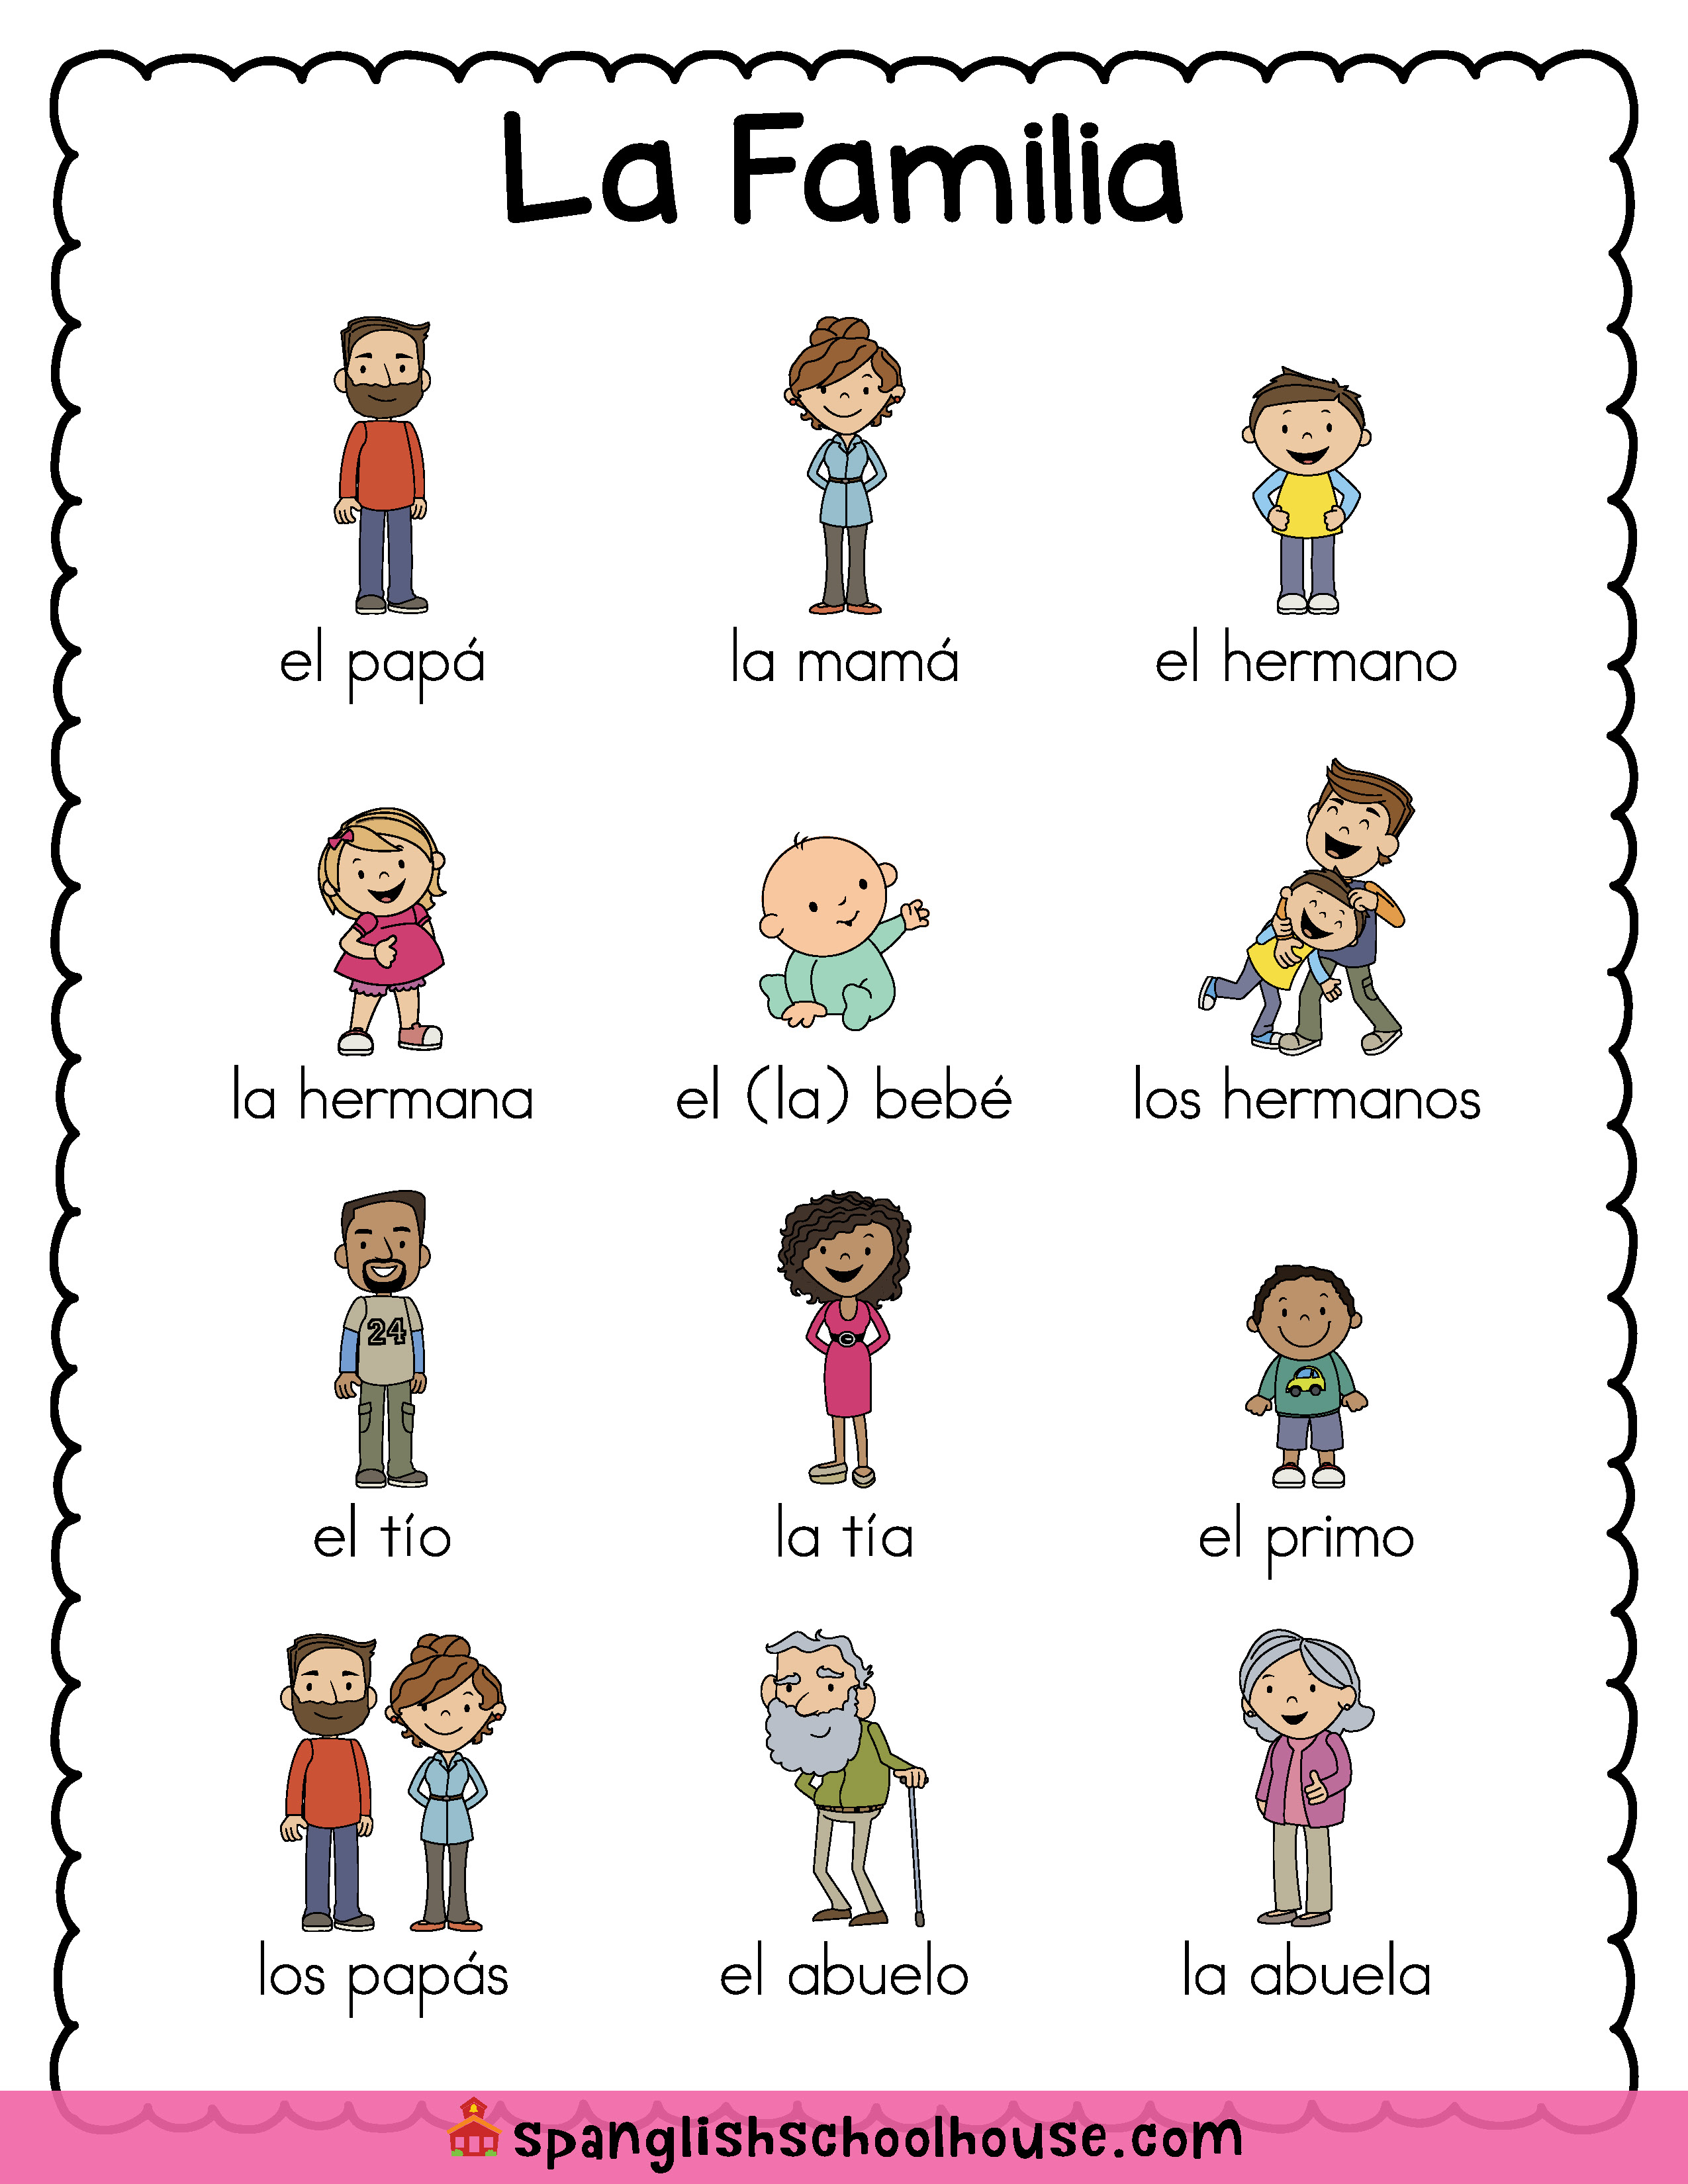 hermano meaning in english